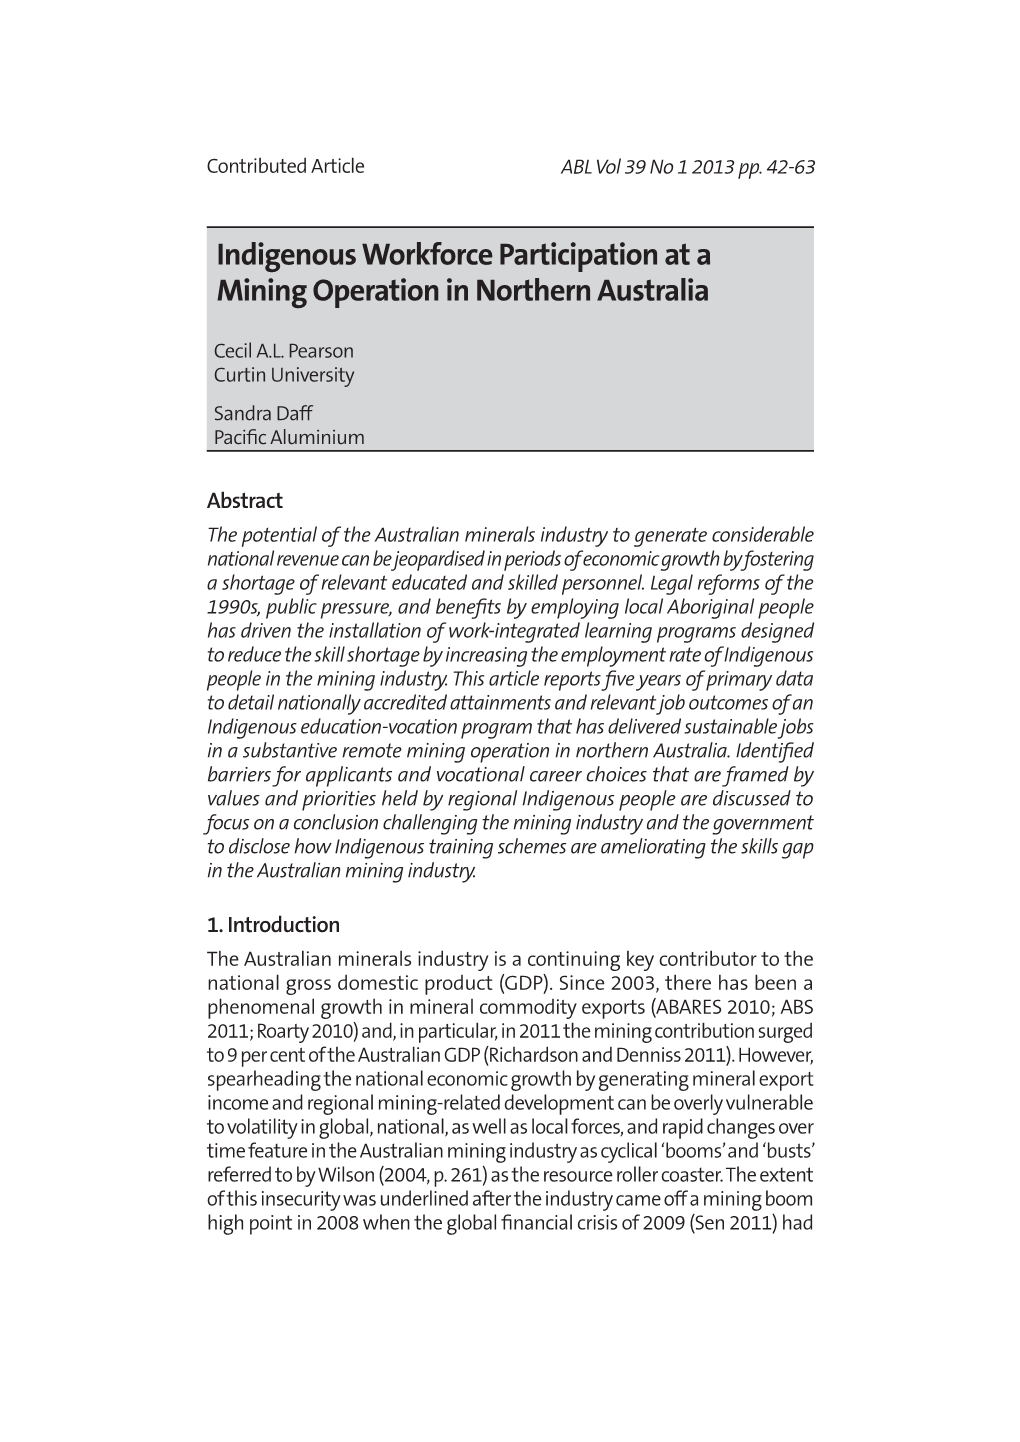 Indigenous Workforce Participation at a Mining Operation in Northern Australia